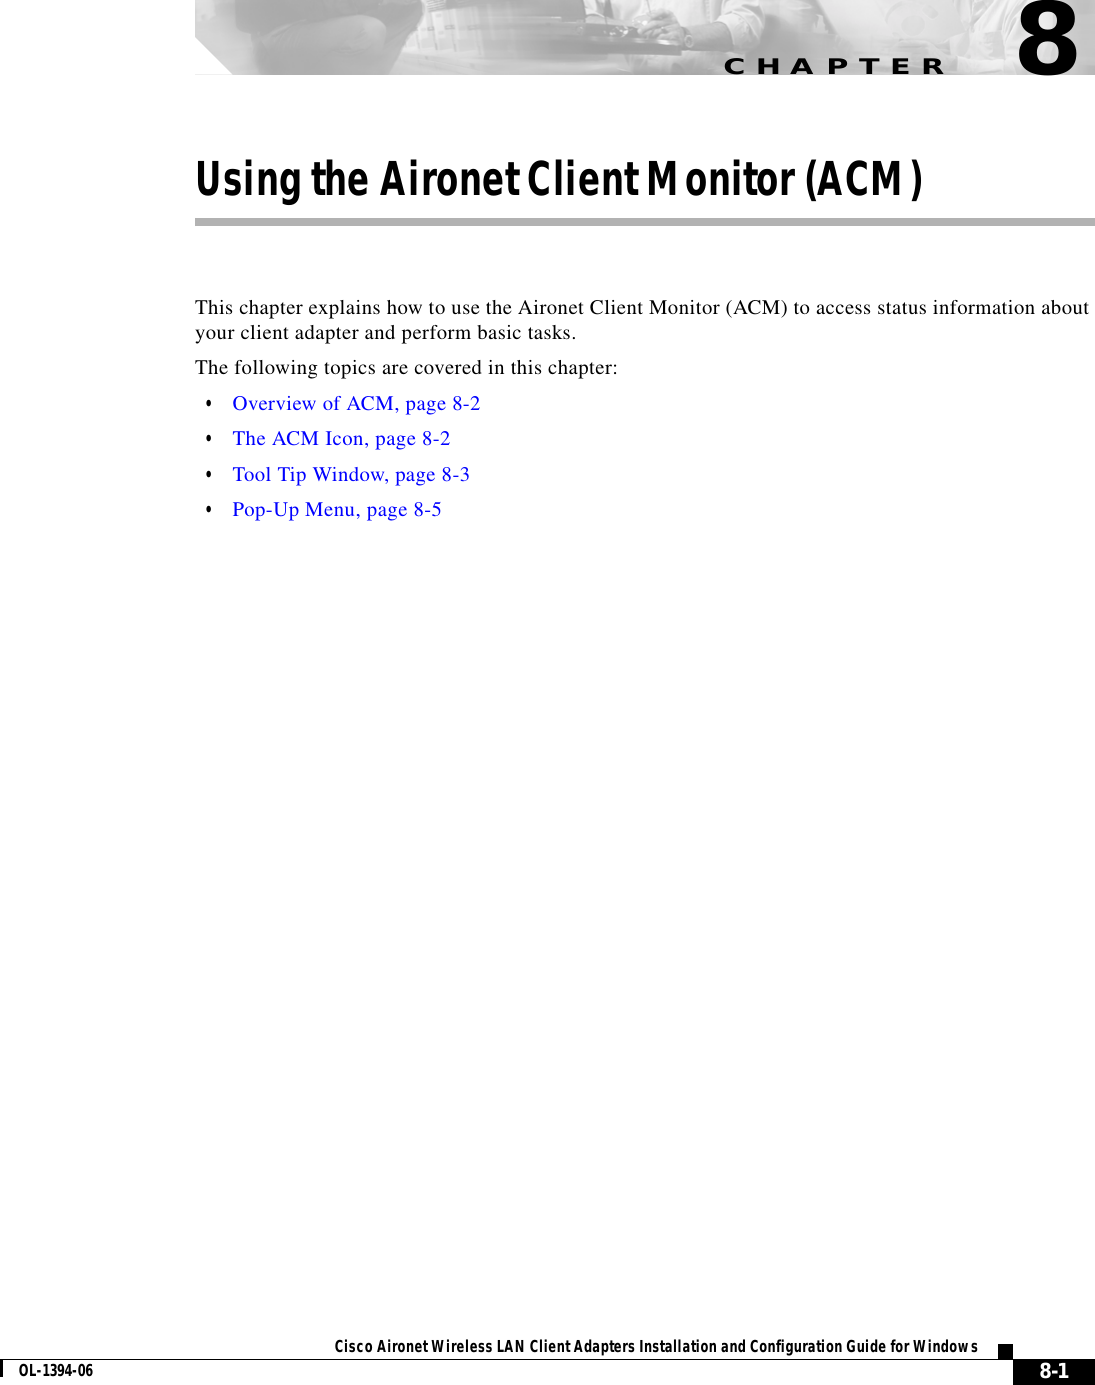 CHAPTER8-1Cisco Aironet Wireless LAN Client Adapters Installation and Configuration Guide for WindowsOL-1394-068Using the Aironet Client Monitor (ACM)This chapter explains how to use the Aironet Client Monitor (ACM) to access status information about your client adapter and perform basic tasks.The following topics are covered in this chapter:•Overview of ACM, page 8-2•The ACM Icon, page 8-2•Tool Tip Window, page 8-3•Pop-Up Menu, page 8-5